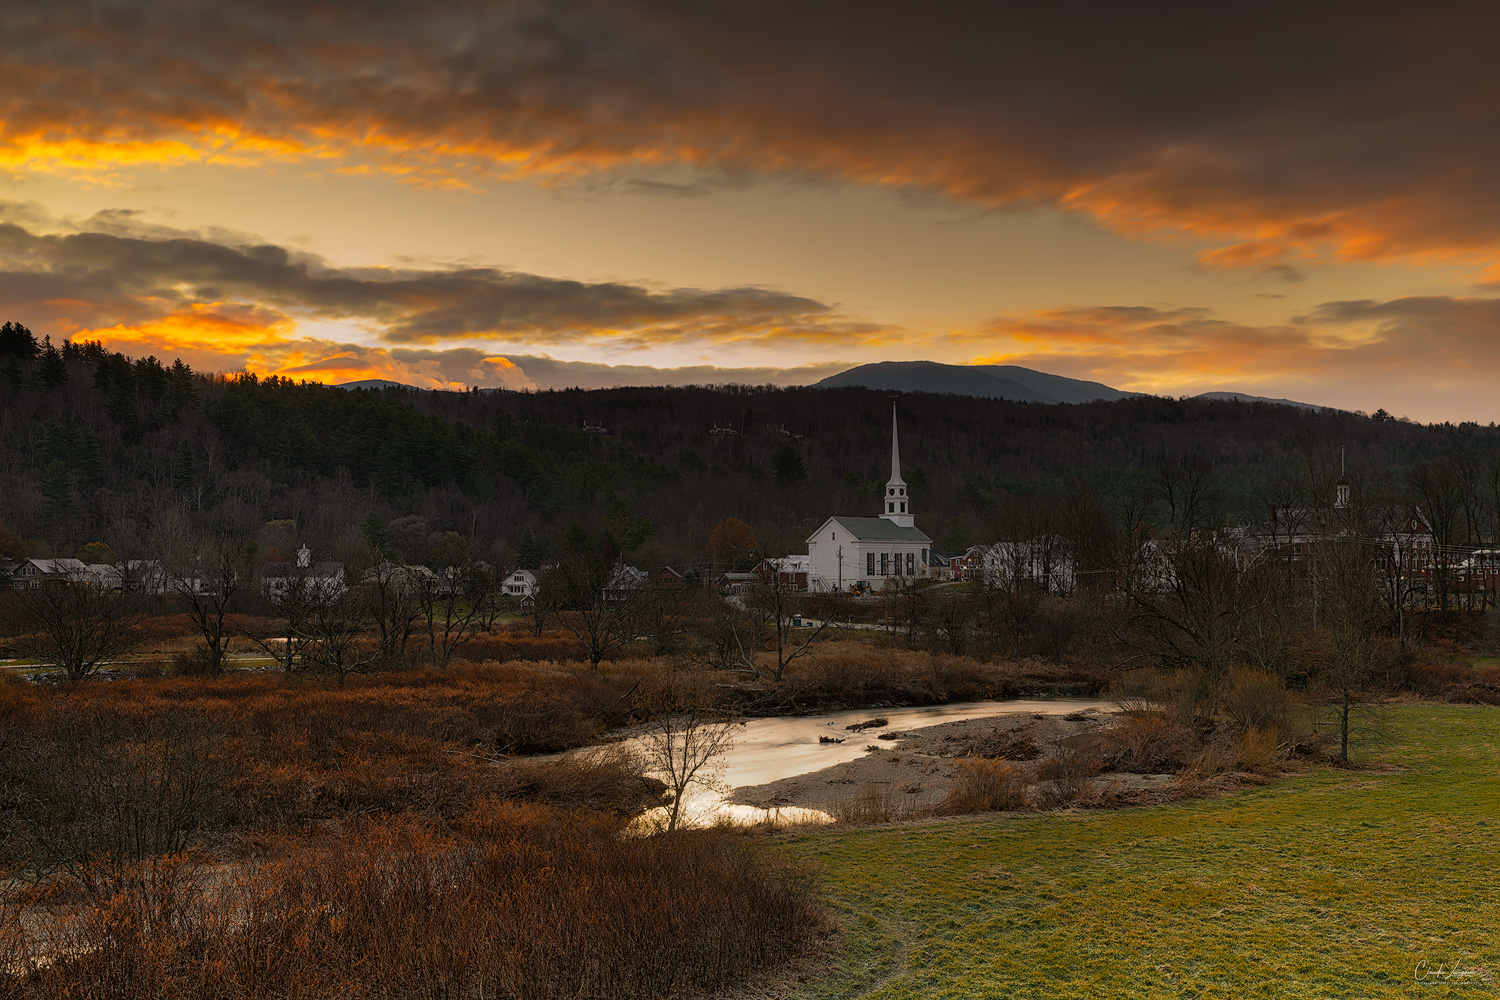 Sunrise over the town of Stowe in Vermont.